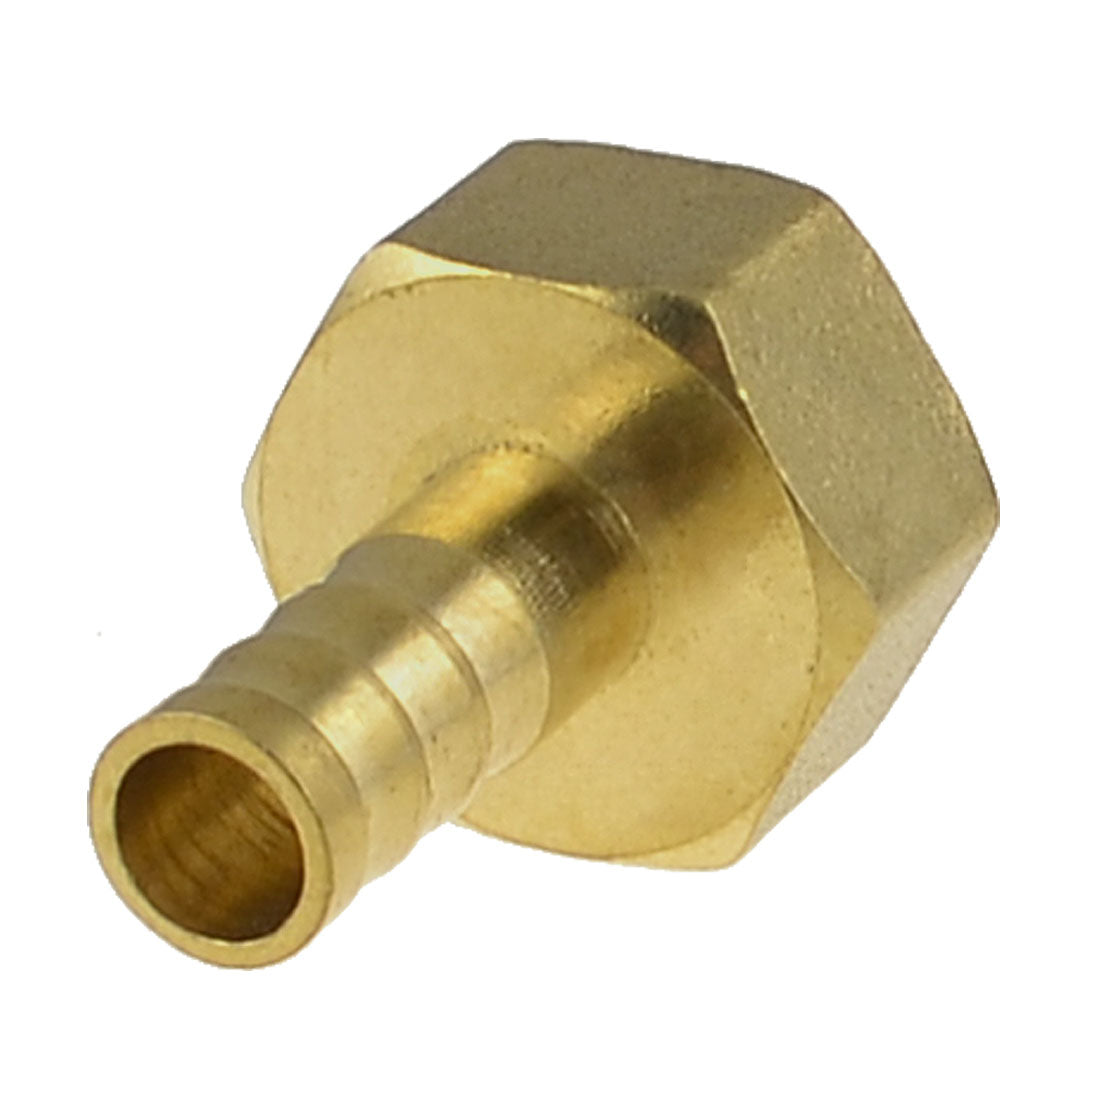 uxcell Uxcell Brass 10mm Hose Barb to 1/2" NPT Female Thread Pneumatic Fitting Connector